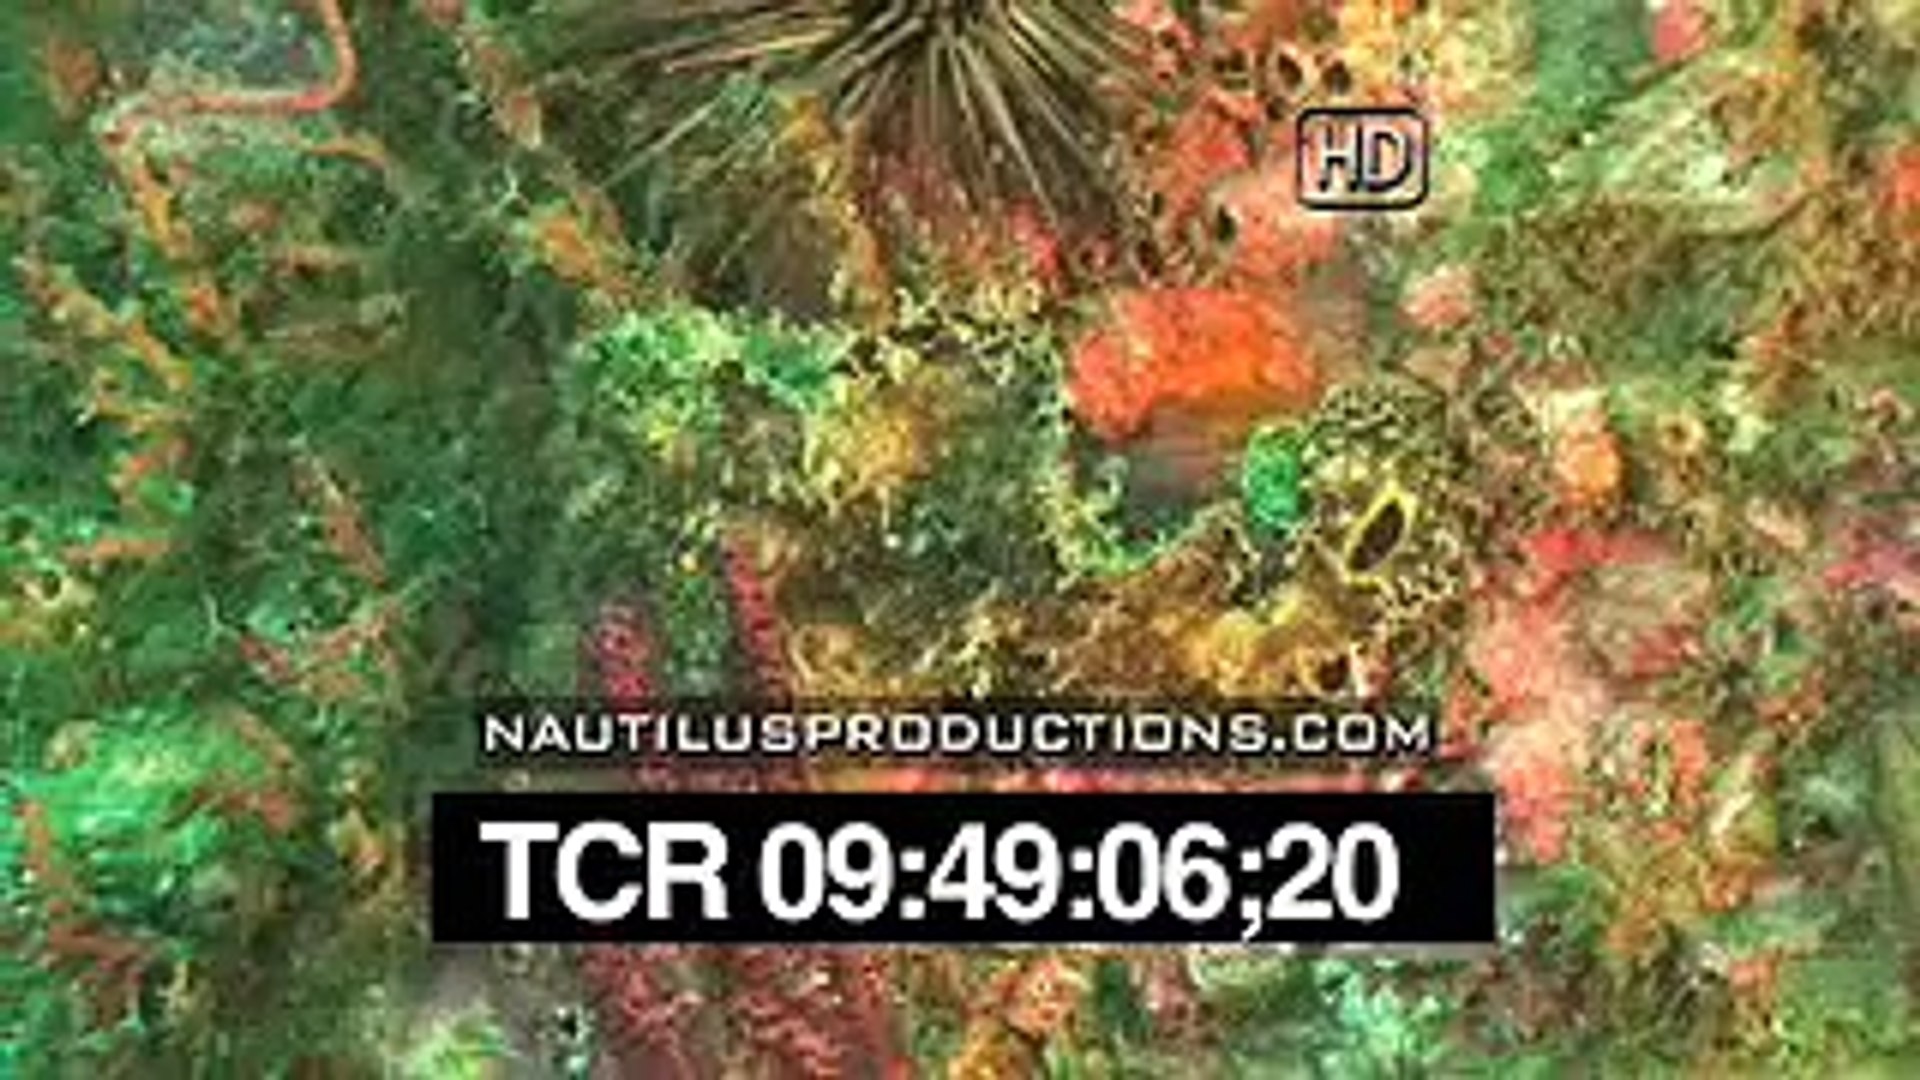 Jellyfish Nautilus Productions HD Stock Footage Video